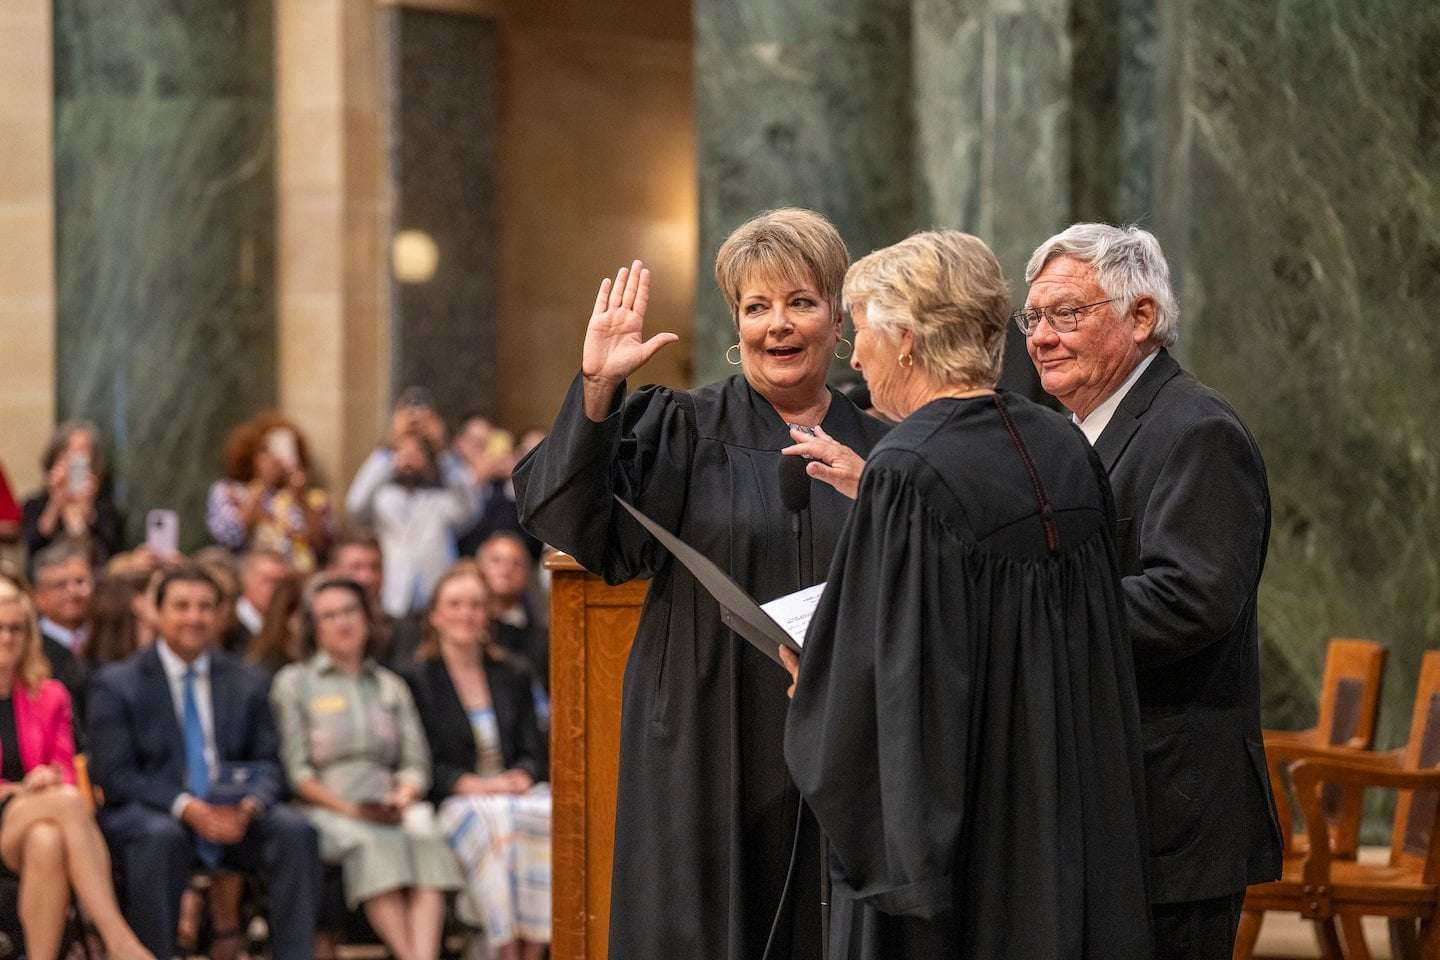 image for Wisconsin Supreme Court flips liberal, creating a ‘seismic shift’